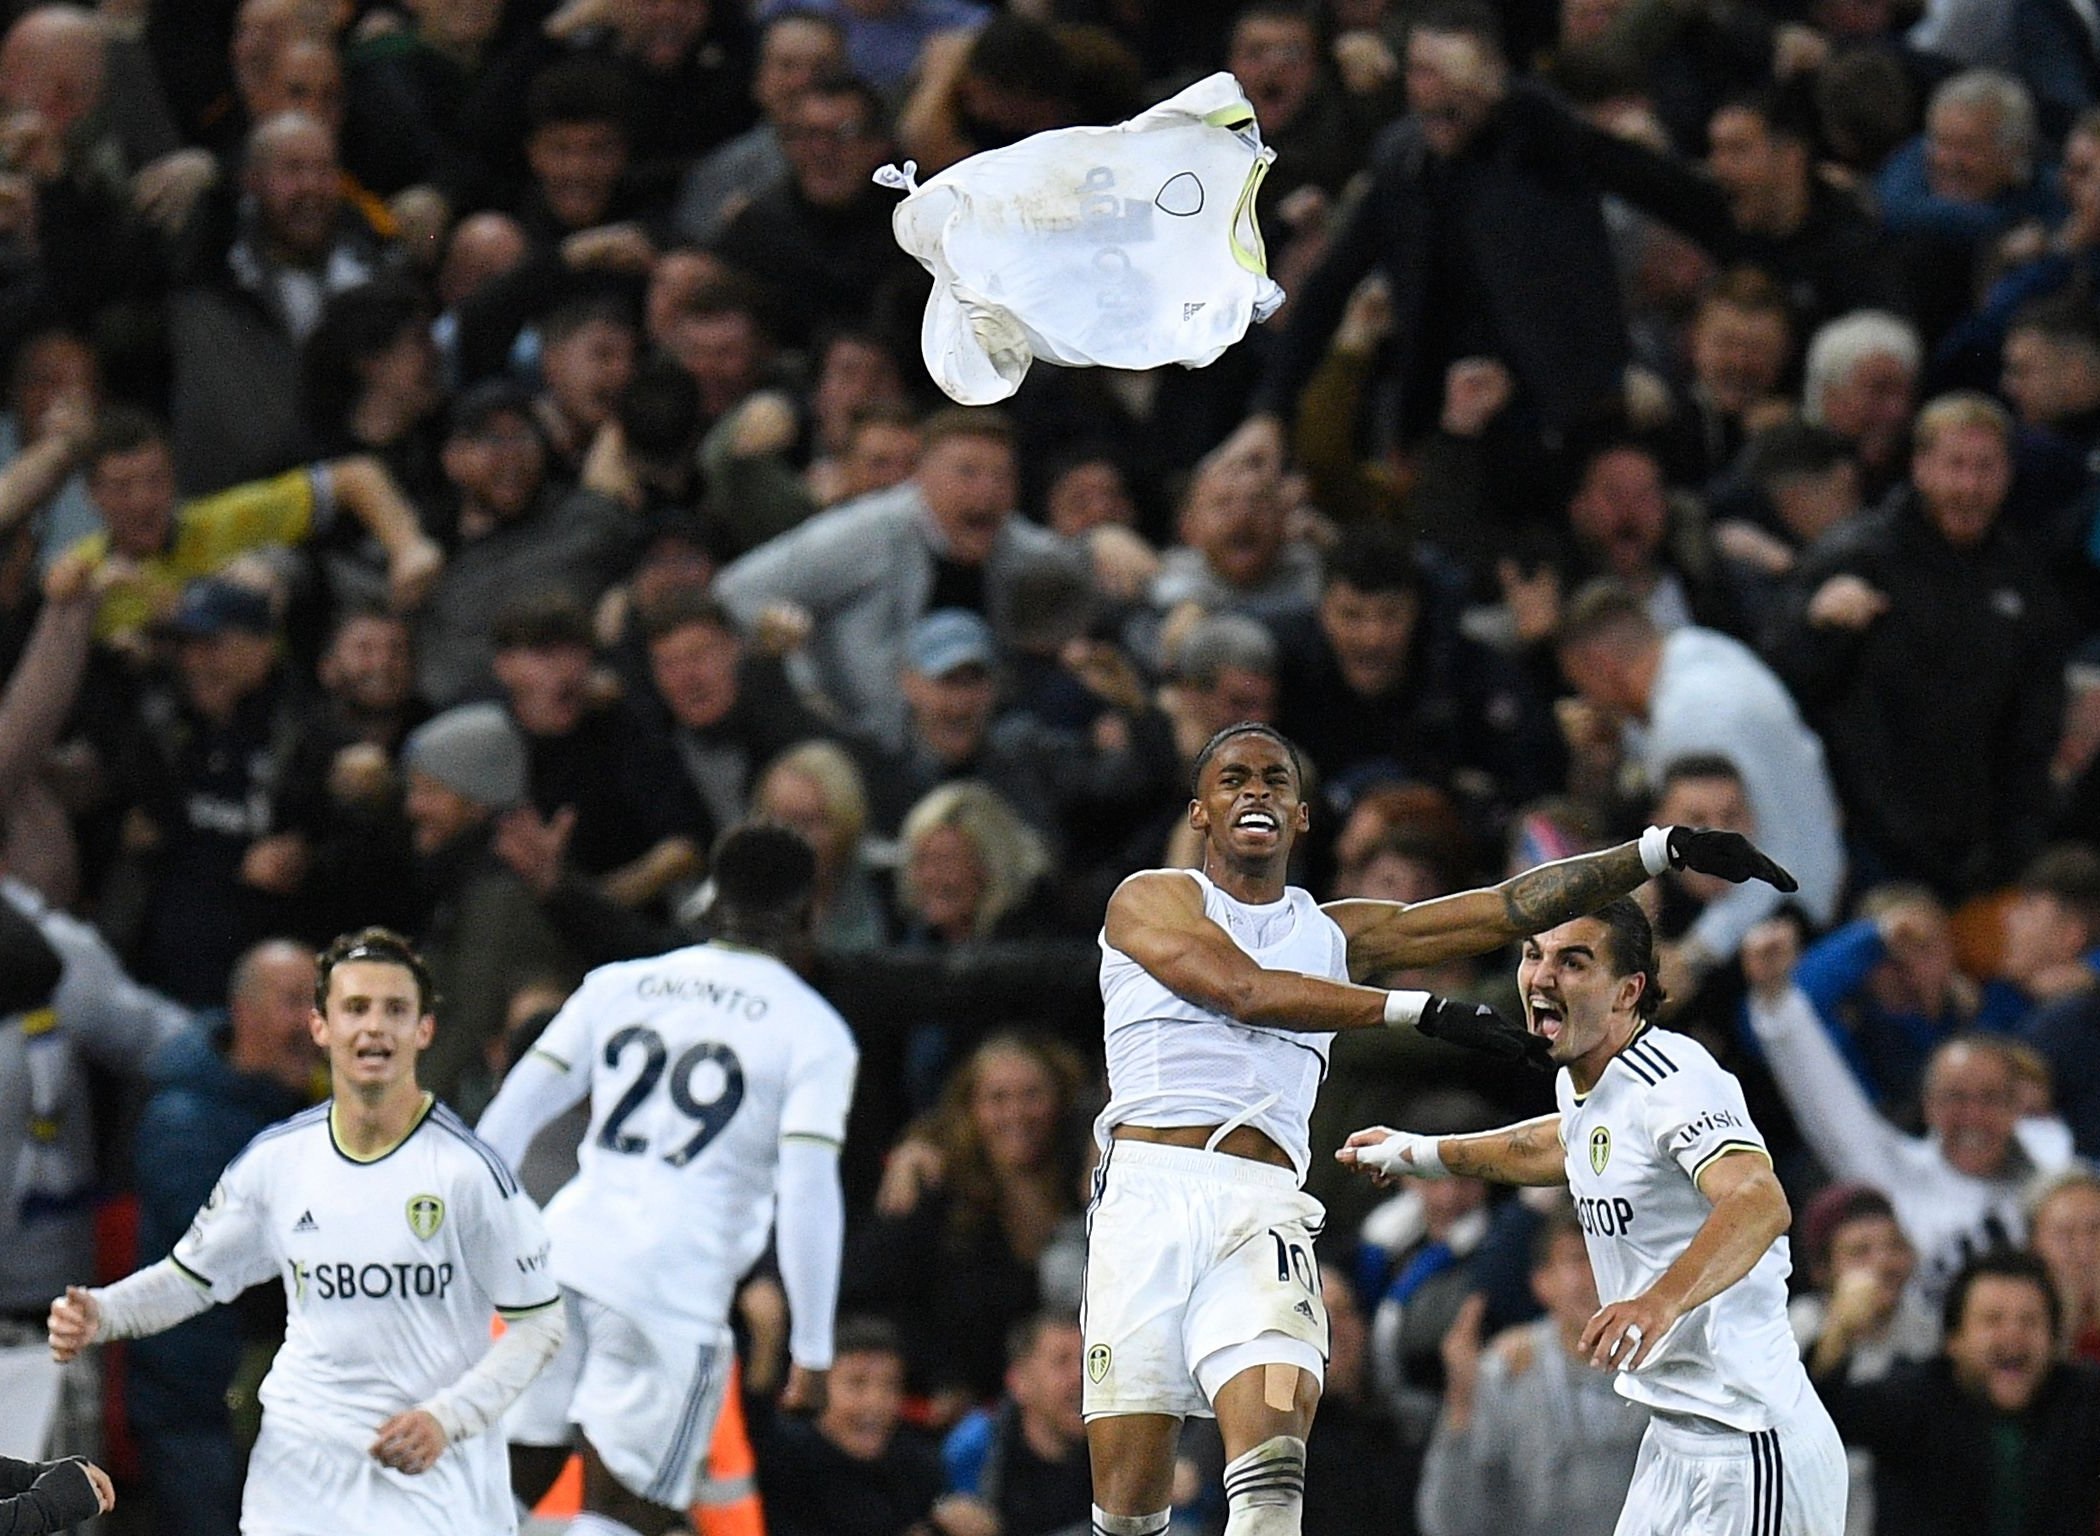 Leeds United player Crysencio Summerville celebrating by throwing his shirt.